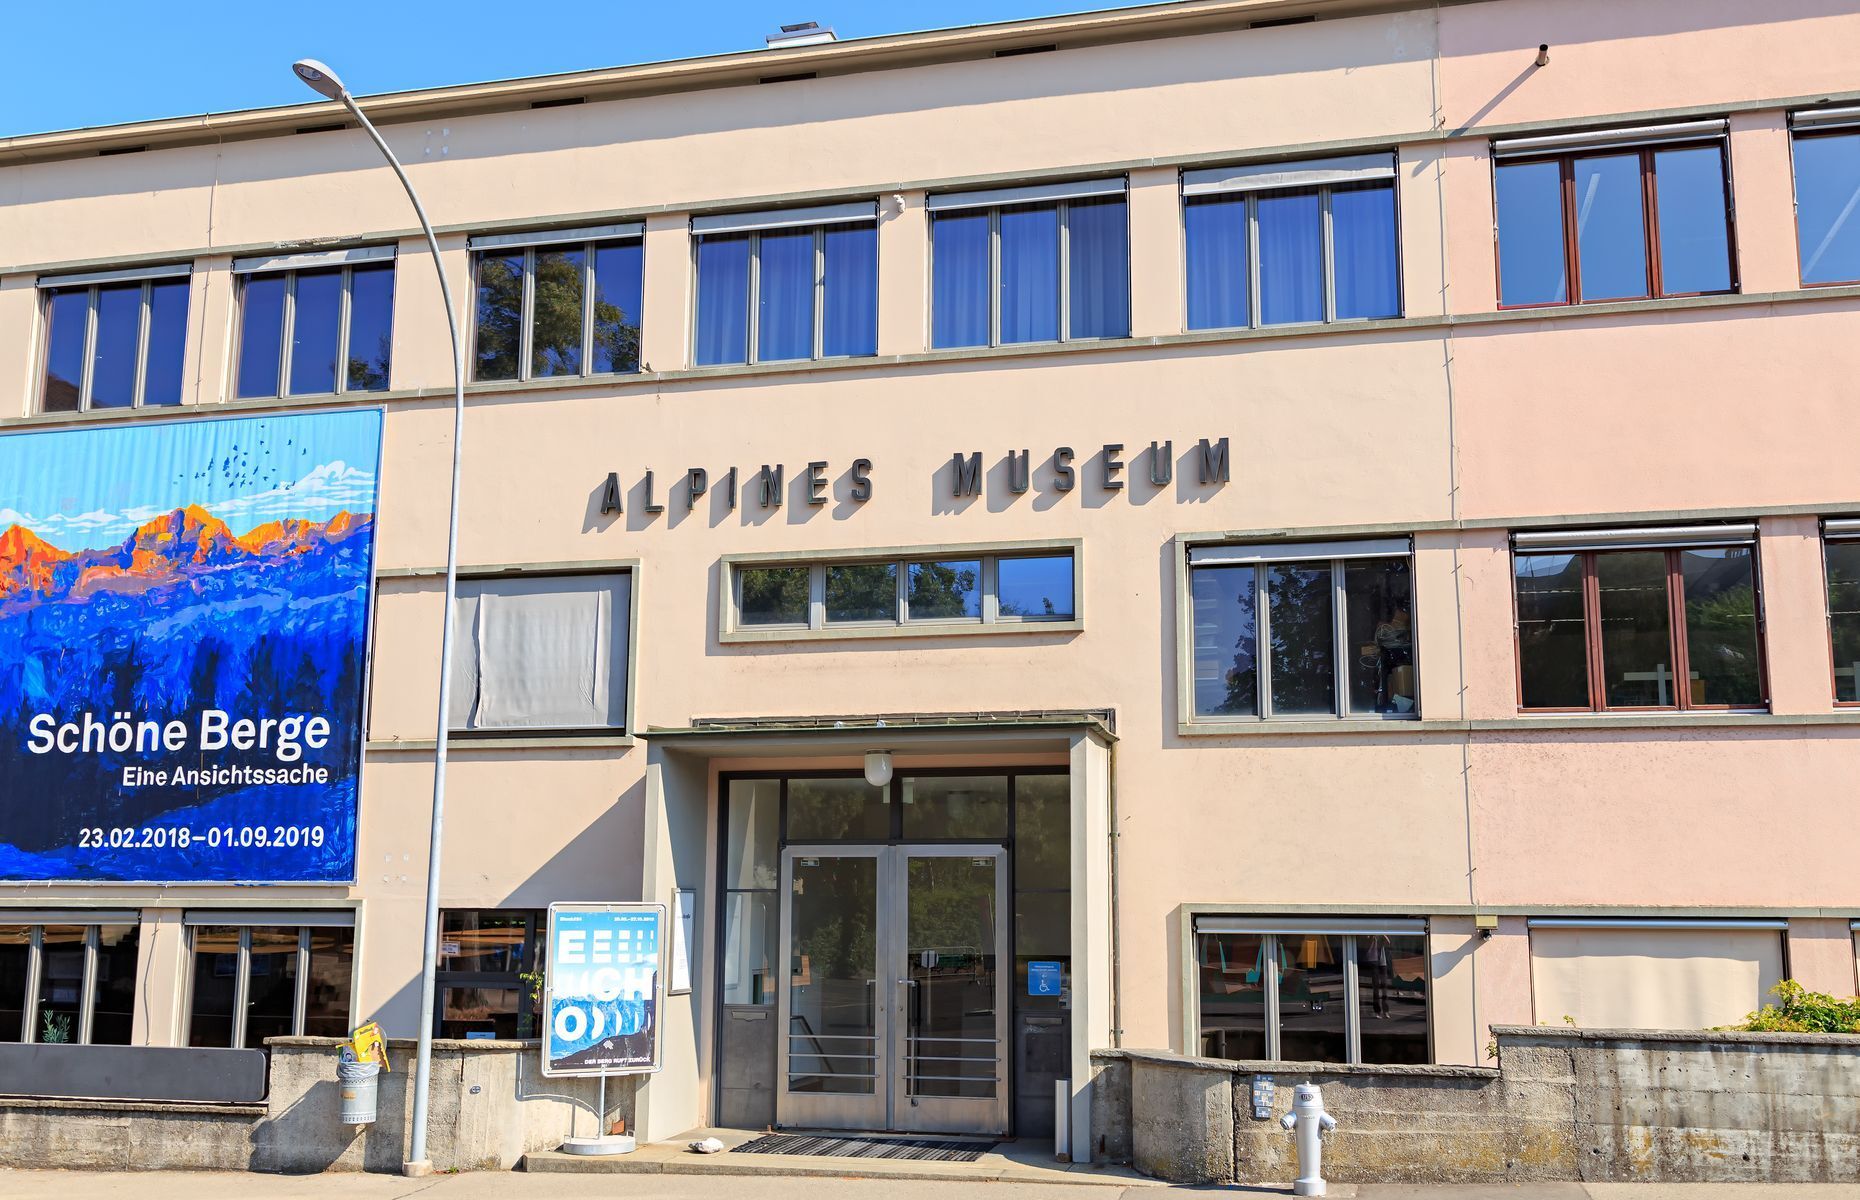 <p>Found in Bern, the <a href="https://www.alpinesmuseum.ch/en" title="https://www.alpinesmuseum.ch/en">Swiss Alpine Museum</a> is dedicated to the nature and culture of the Swiss. Established in 1905, the museum features photos, maps, and paintings for a total of more than 20,000 items. Unfortunately, the museum doesn’t even make the top 10 of best-rated <a href="https://www.tripadvisor.ca/Attractions-g188052-Activities-Bern_Bern_Mittelland_District_Canton_of_Bern.html">attractions in Bern</a> on TripAdvisor, and the reviews on Google aren’t great either. One guest posted on Google that the museum is an “expensive entry for nothing special,” while another <a href="https://www.tripadvisor.com/ShowUserReviews-g188052-d314755-r332125174-Swiss_Alpine_Museum-Bern_Bern_Mittelland_District_Canton_of_Bern.html" title="https://www.tripadvisor.com/ShowUserReviews-g188052-d314755-r332125174-Swiss_Alpine_Museum-Bern_Bern_Mittelland_District_Canton_of_Bern.html">TripAdvisor visitor</a> said “Don’t waste your time and money here.”</p>